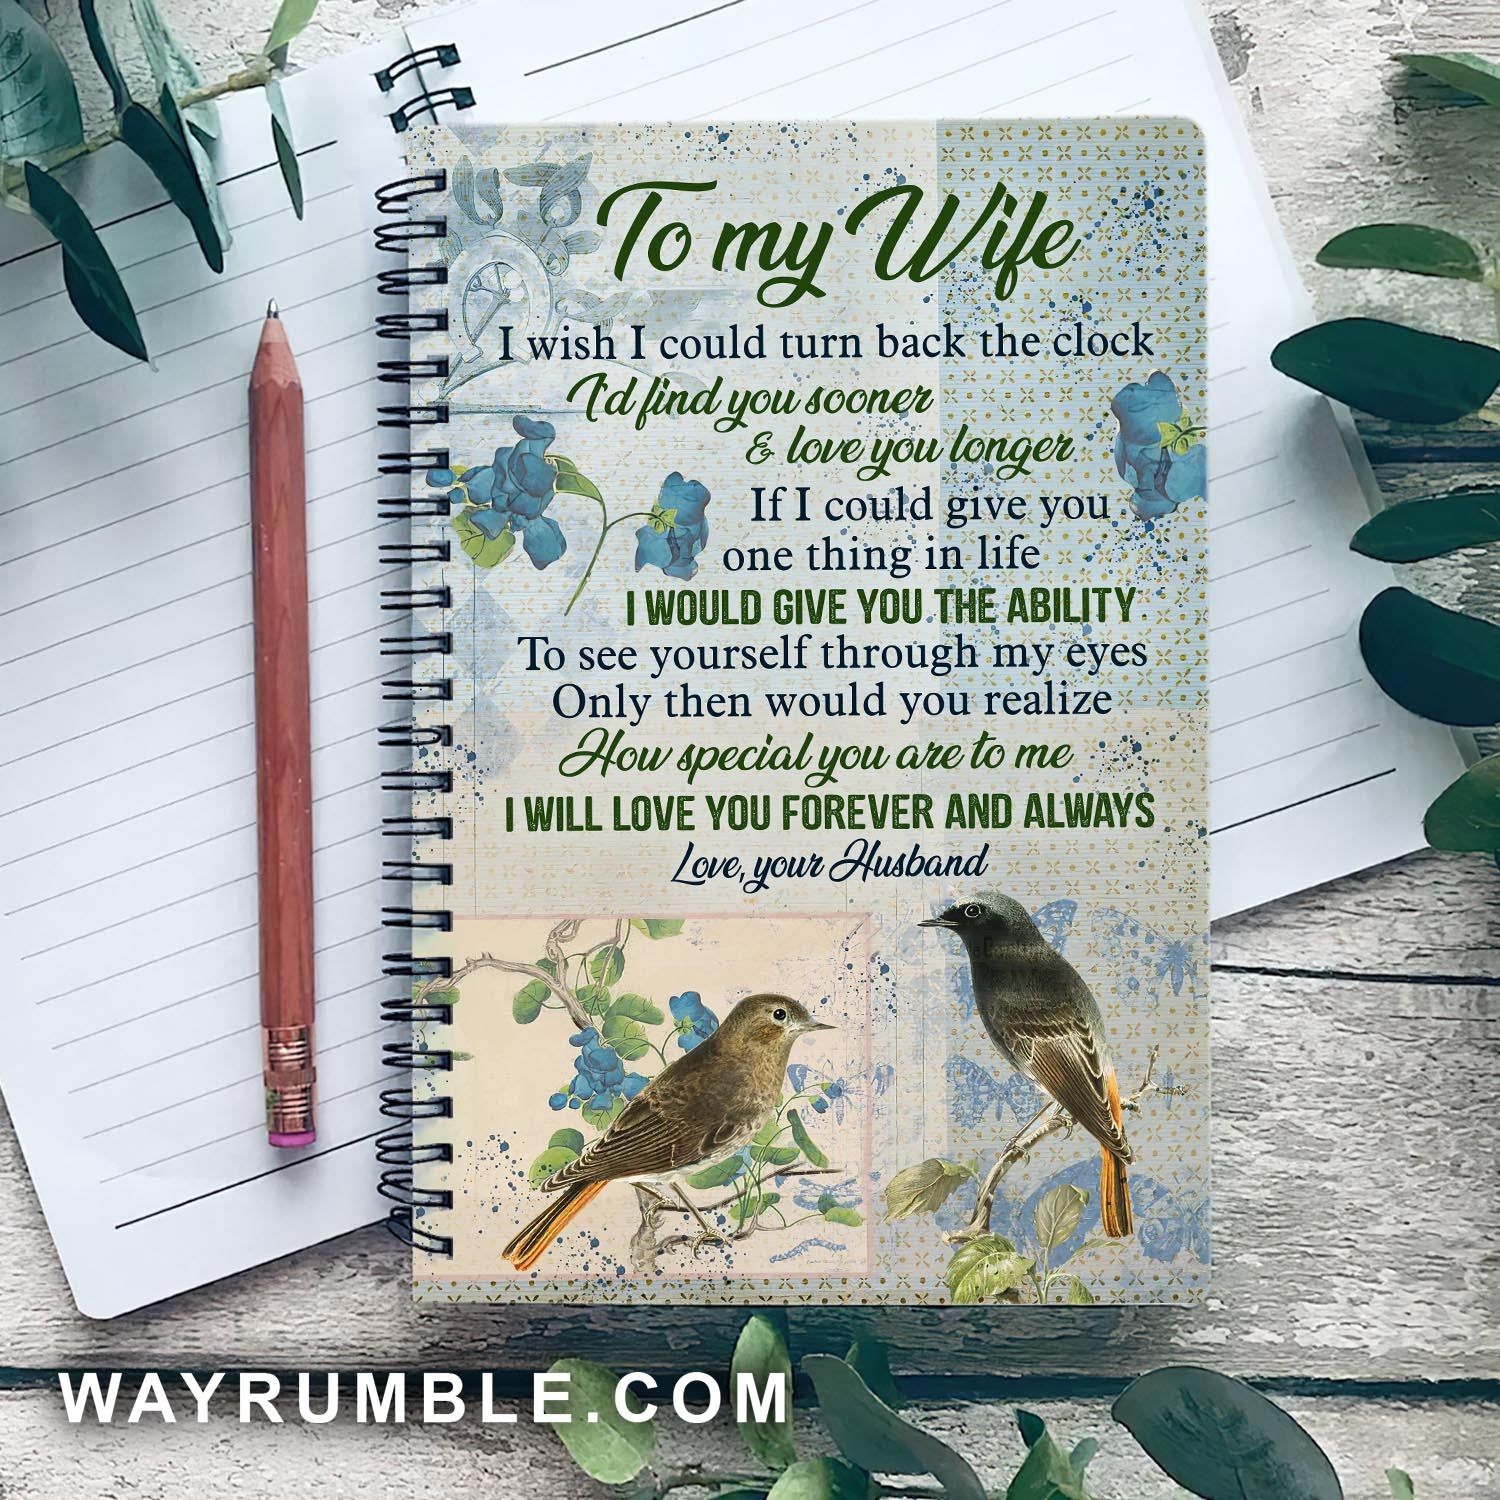 To my wife, I will love you forever and always - Birds painting Spiral Journal